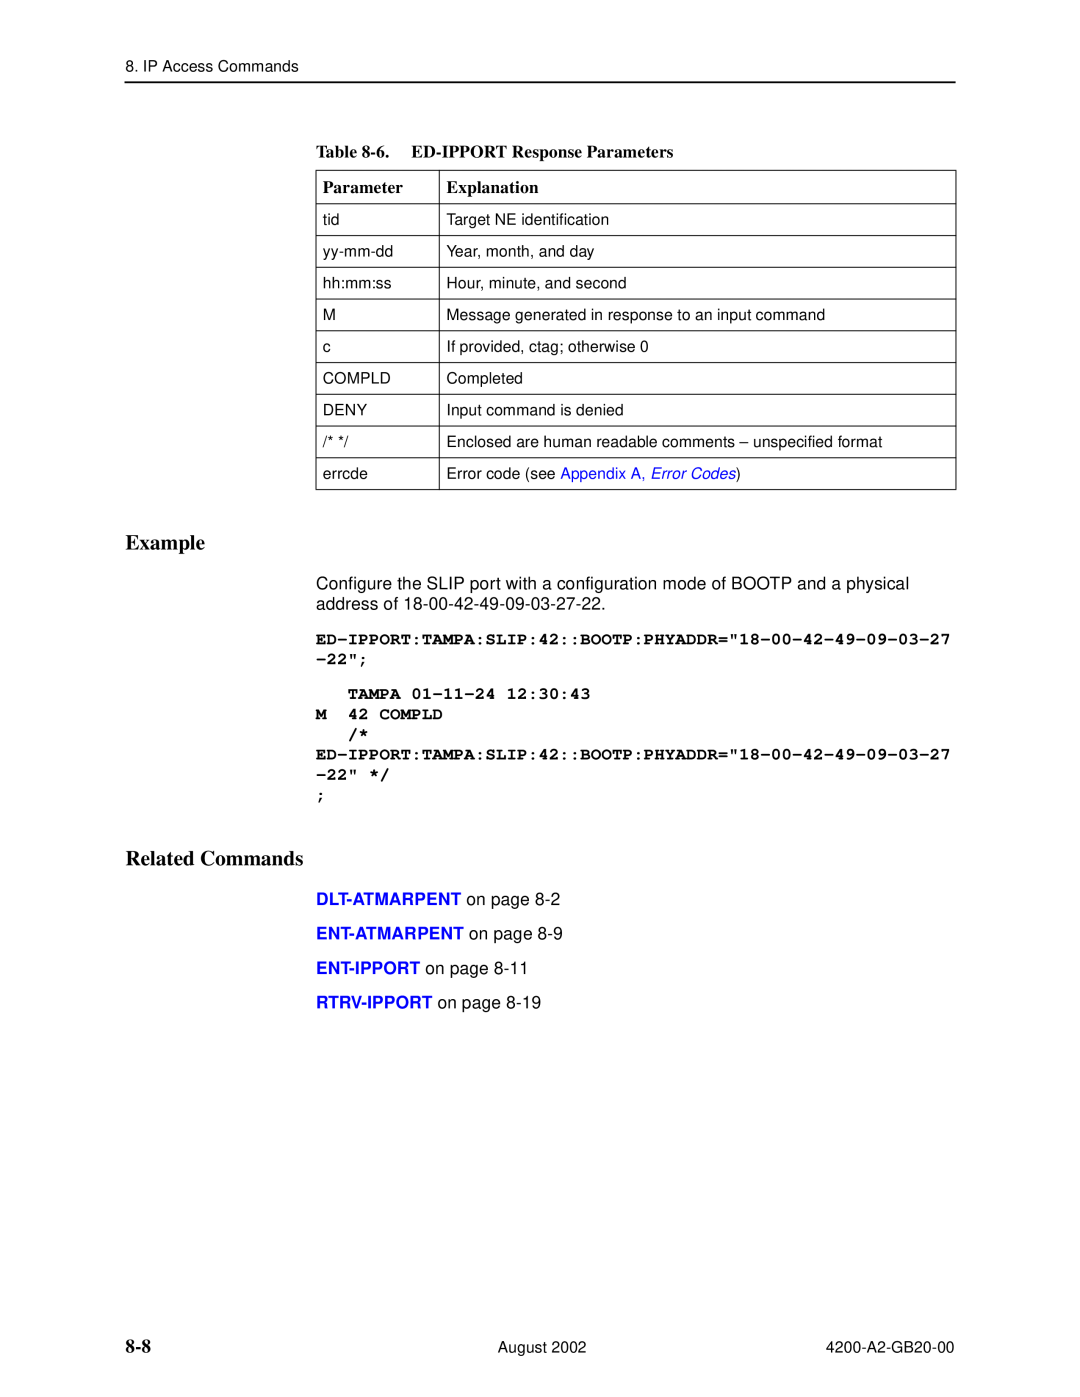 Paradyne 4200 6. ED-IPPORT Response Parameters, ED-IPPORTTAMPASLIP42BOOTPPHYADDR=18-00-42-49-09-03-27, RTRV-IPPORT on page 